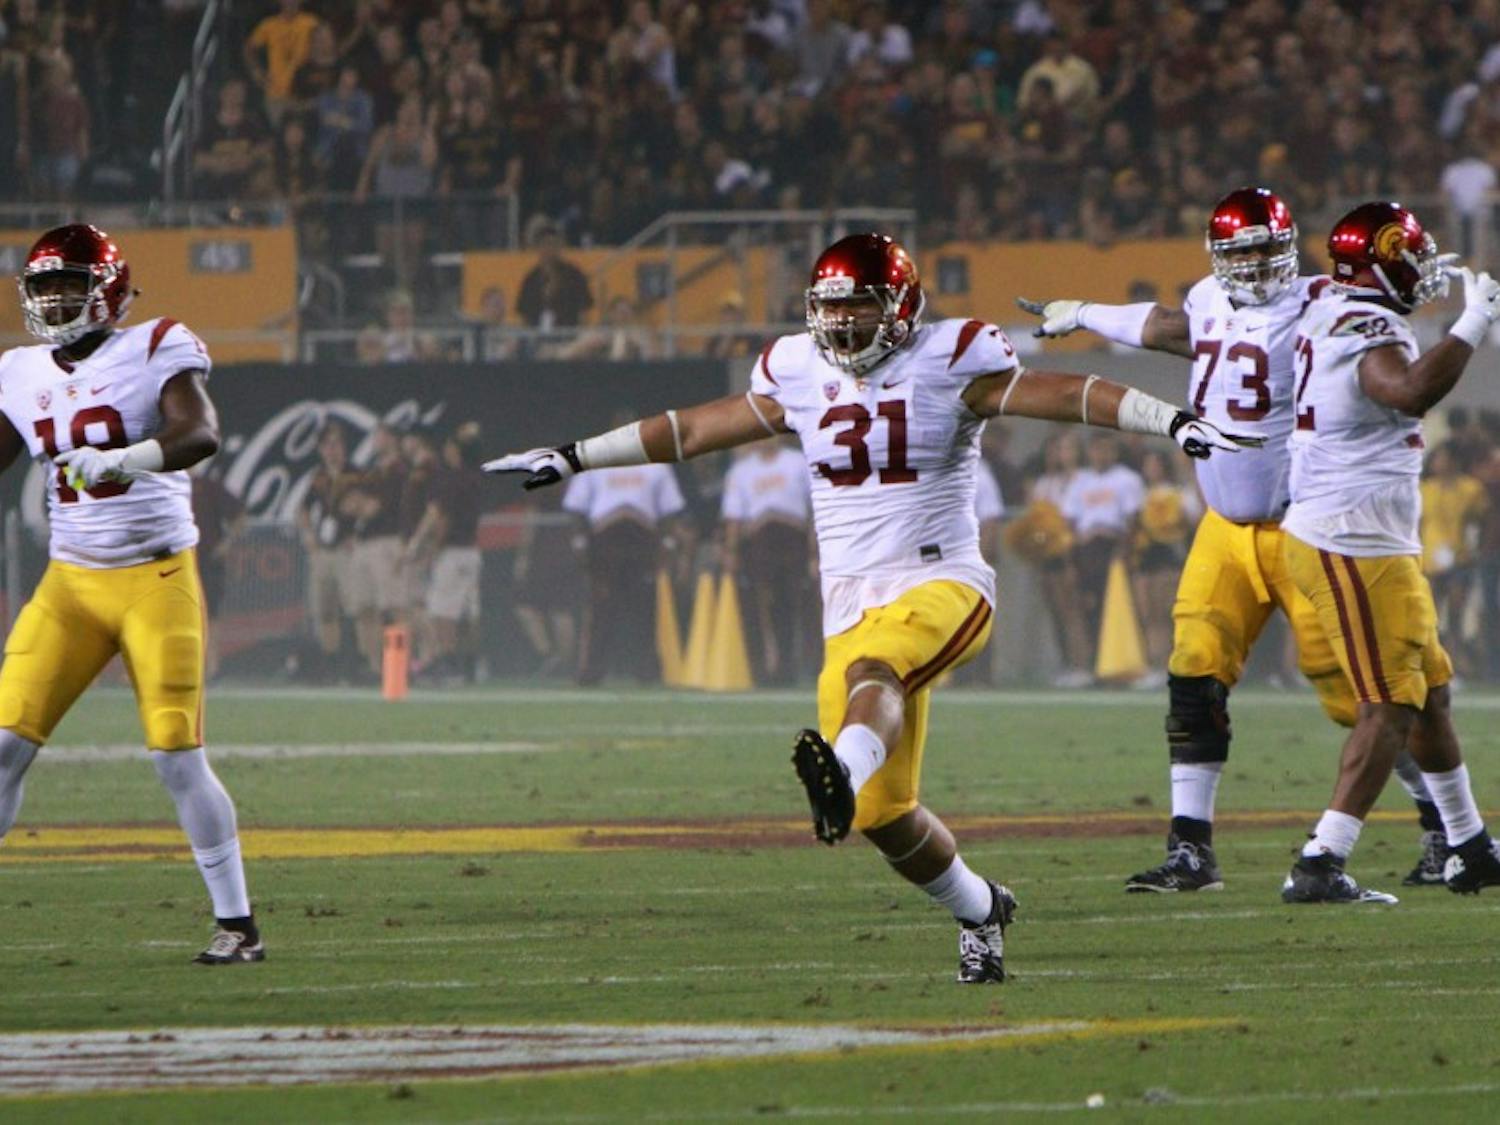 USC fullback Soma Vainuku (31) reacts after a missed field goal by Arizona State Saturday, Sept. 26, 2015 at Sun Devil Stadium in Tempe. 